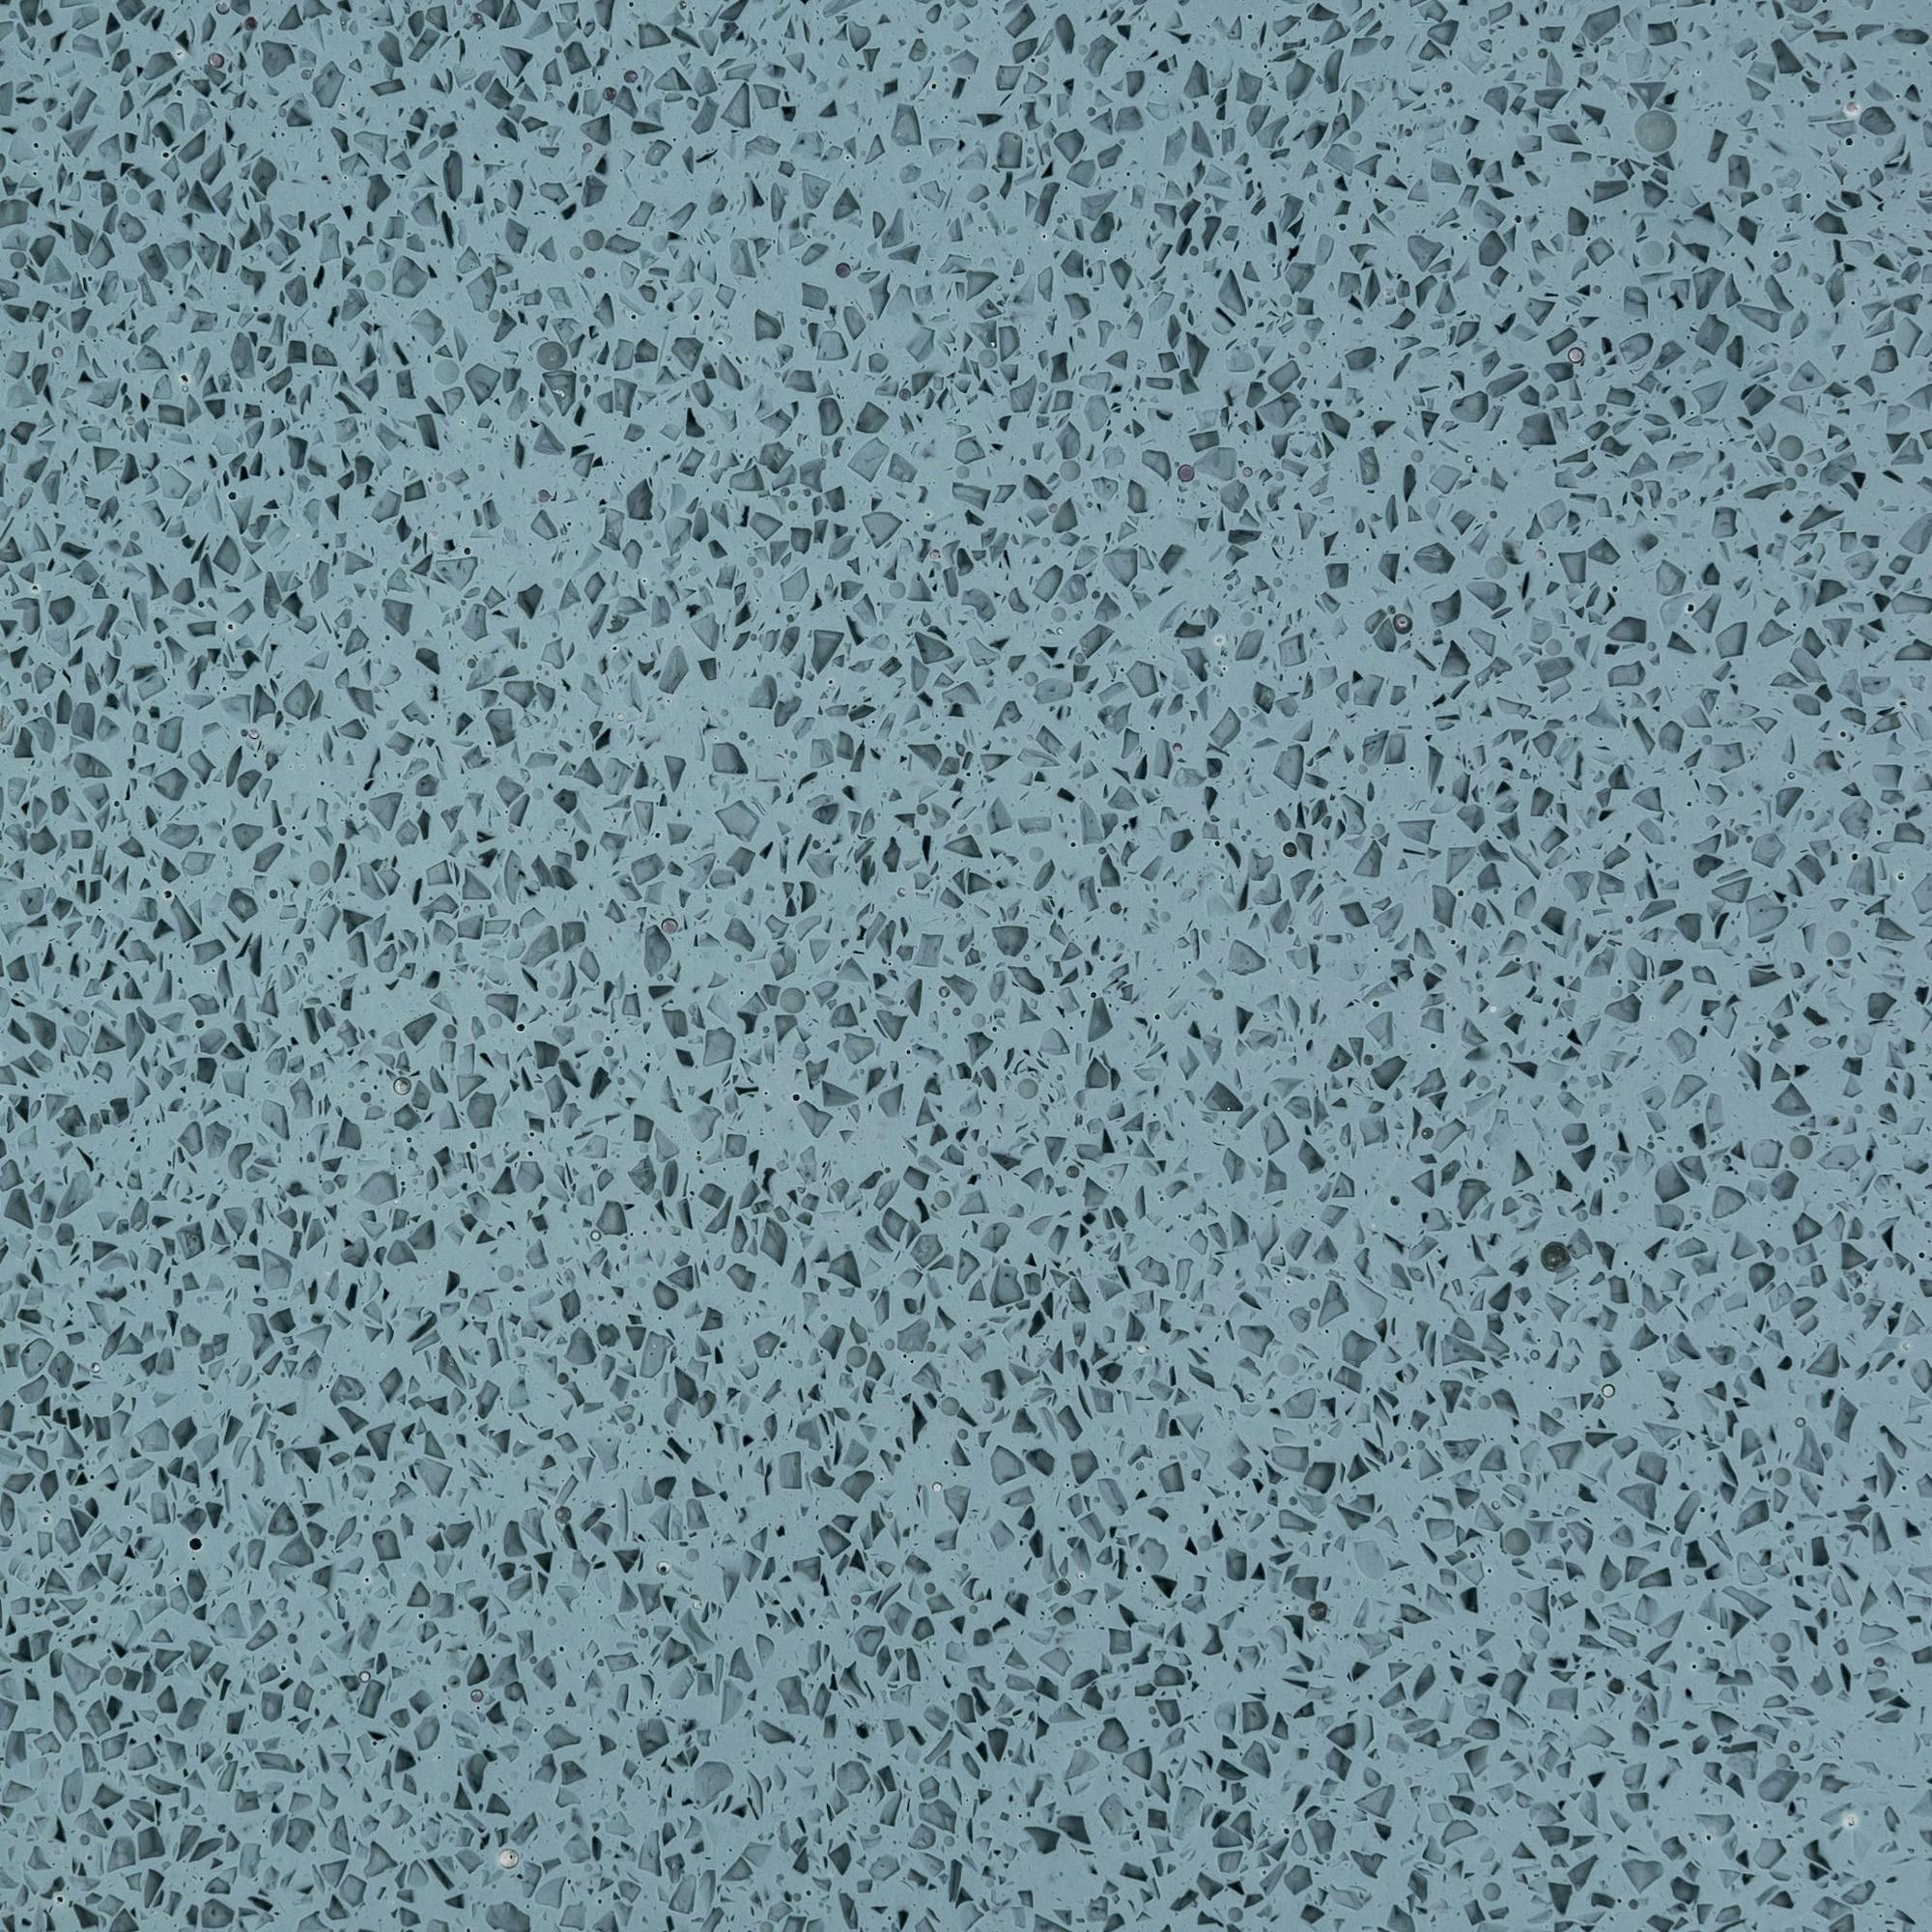 D0720 00 Durat 720 Blue grey clear small speckles sample